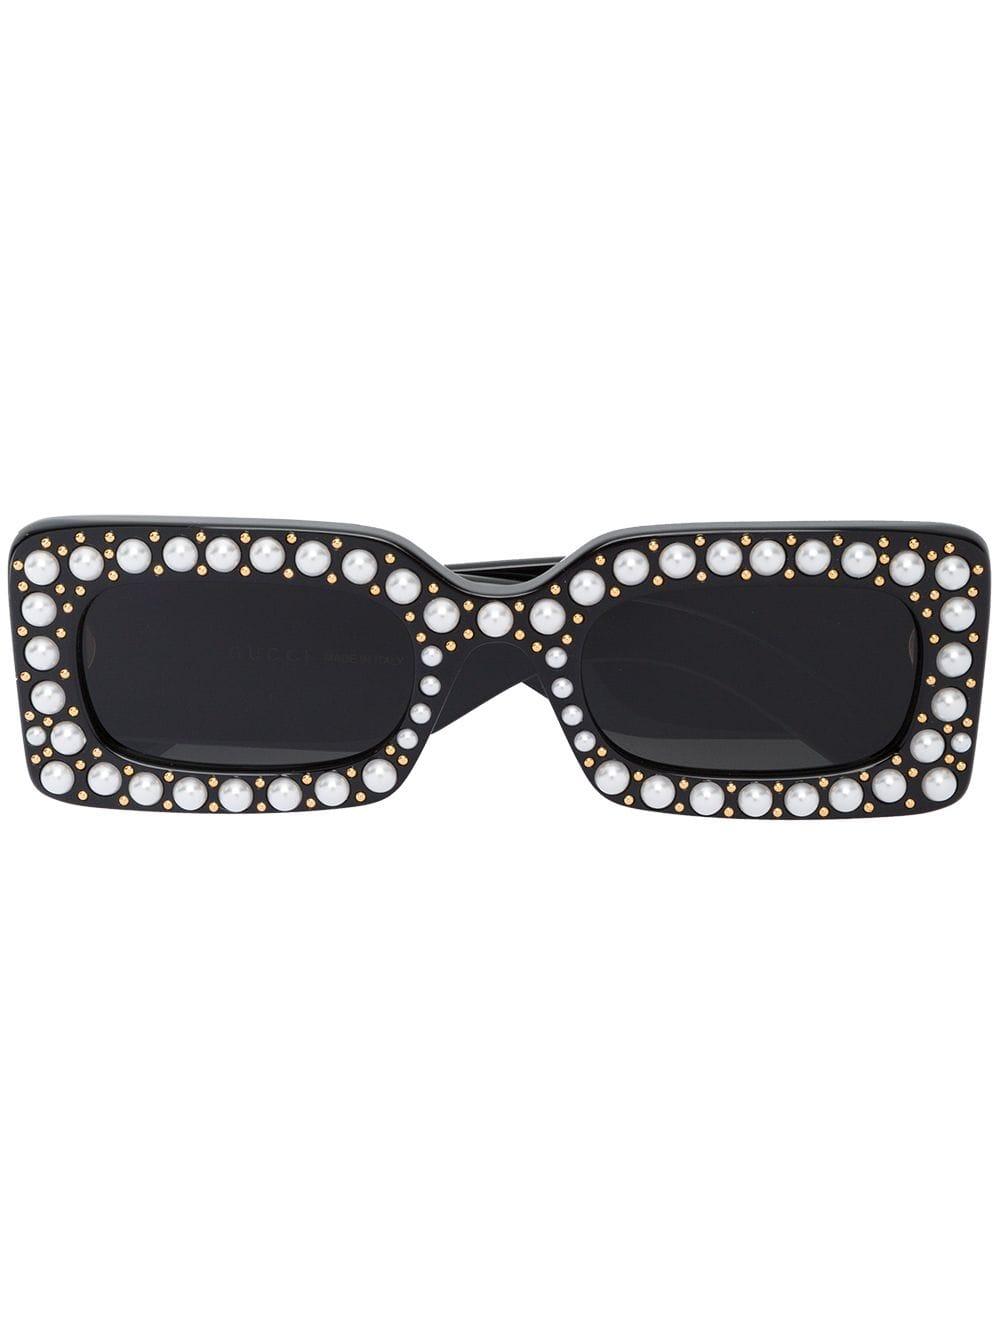 Gucci Hollywood Forever Faux Pearl Embellished Sunglasses in Black | Lyst